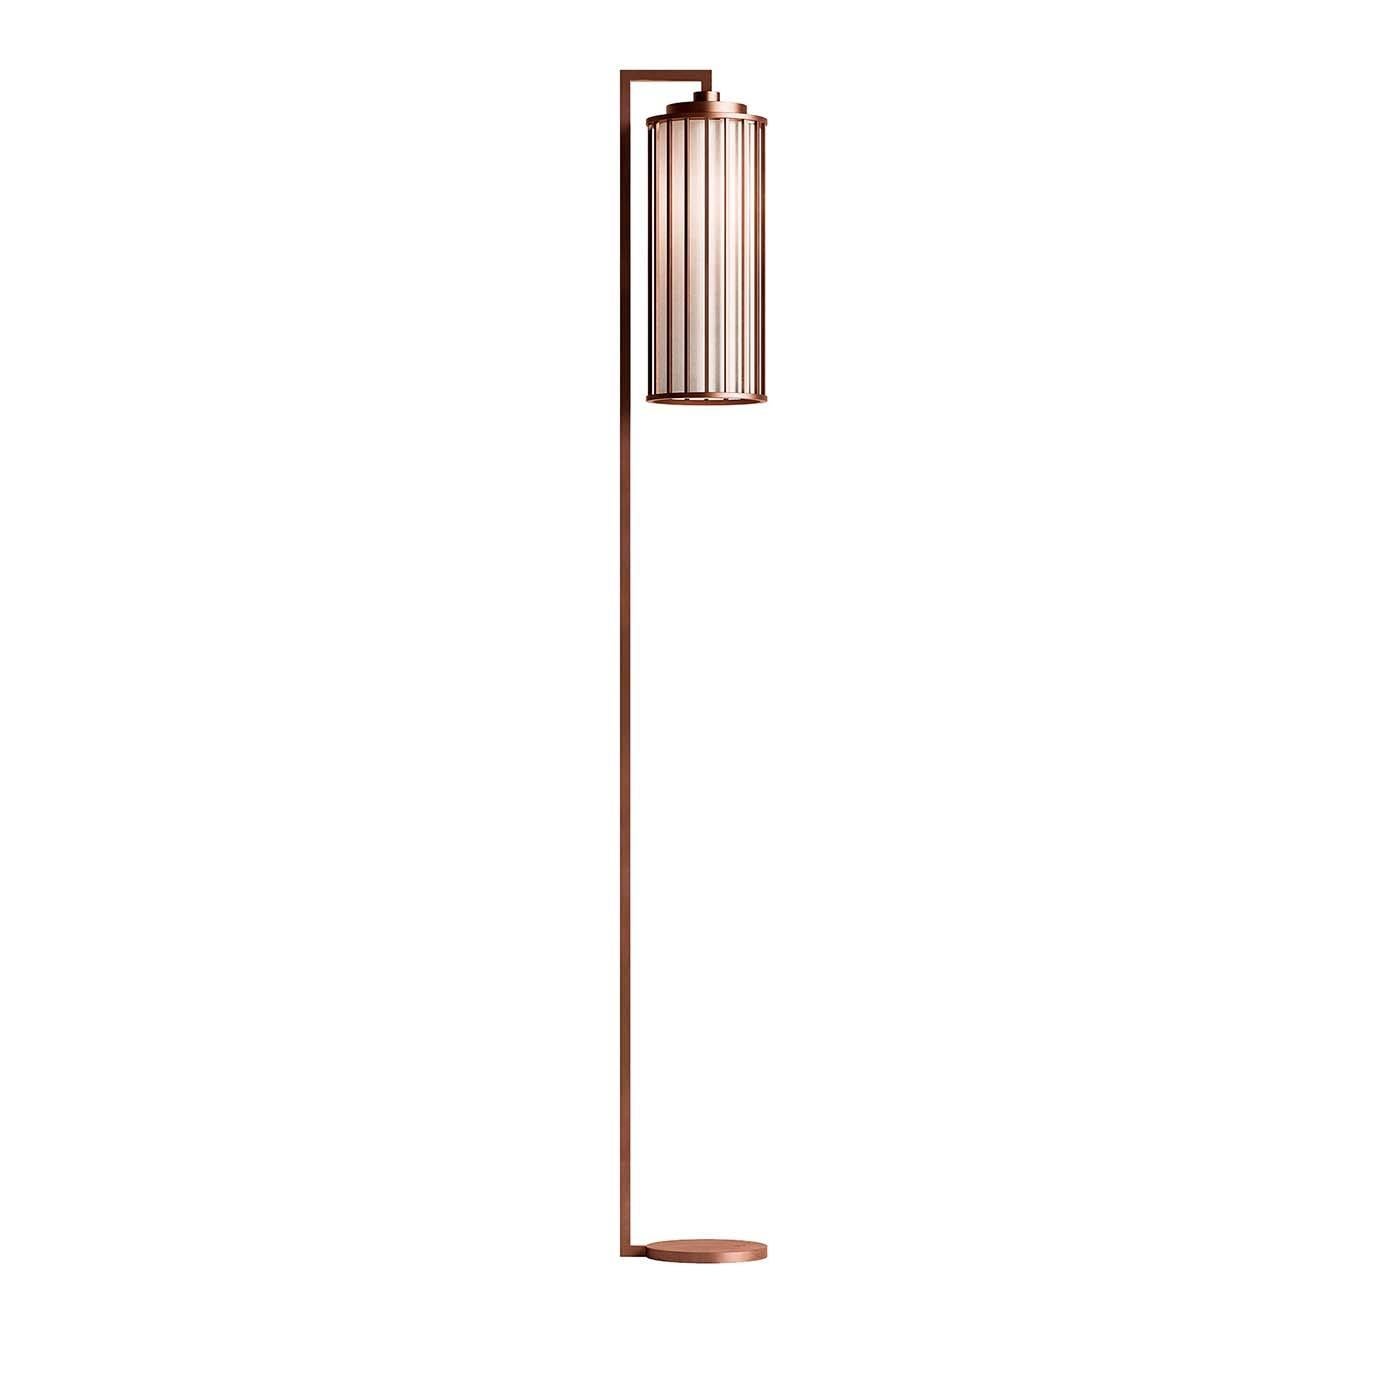 This glamorous floor lamp is a work of art that stands out for its sleek lines and well-proportioned volumes, enriching any interior with timeless elegance. Inspired by the shape of old-fashioned lamp posts, this piece features a metal structure